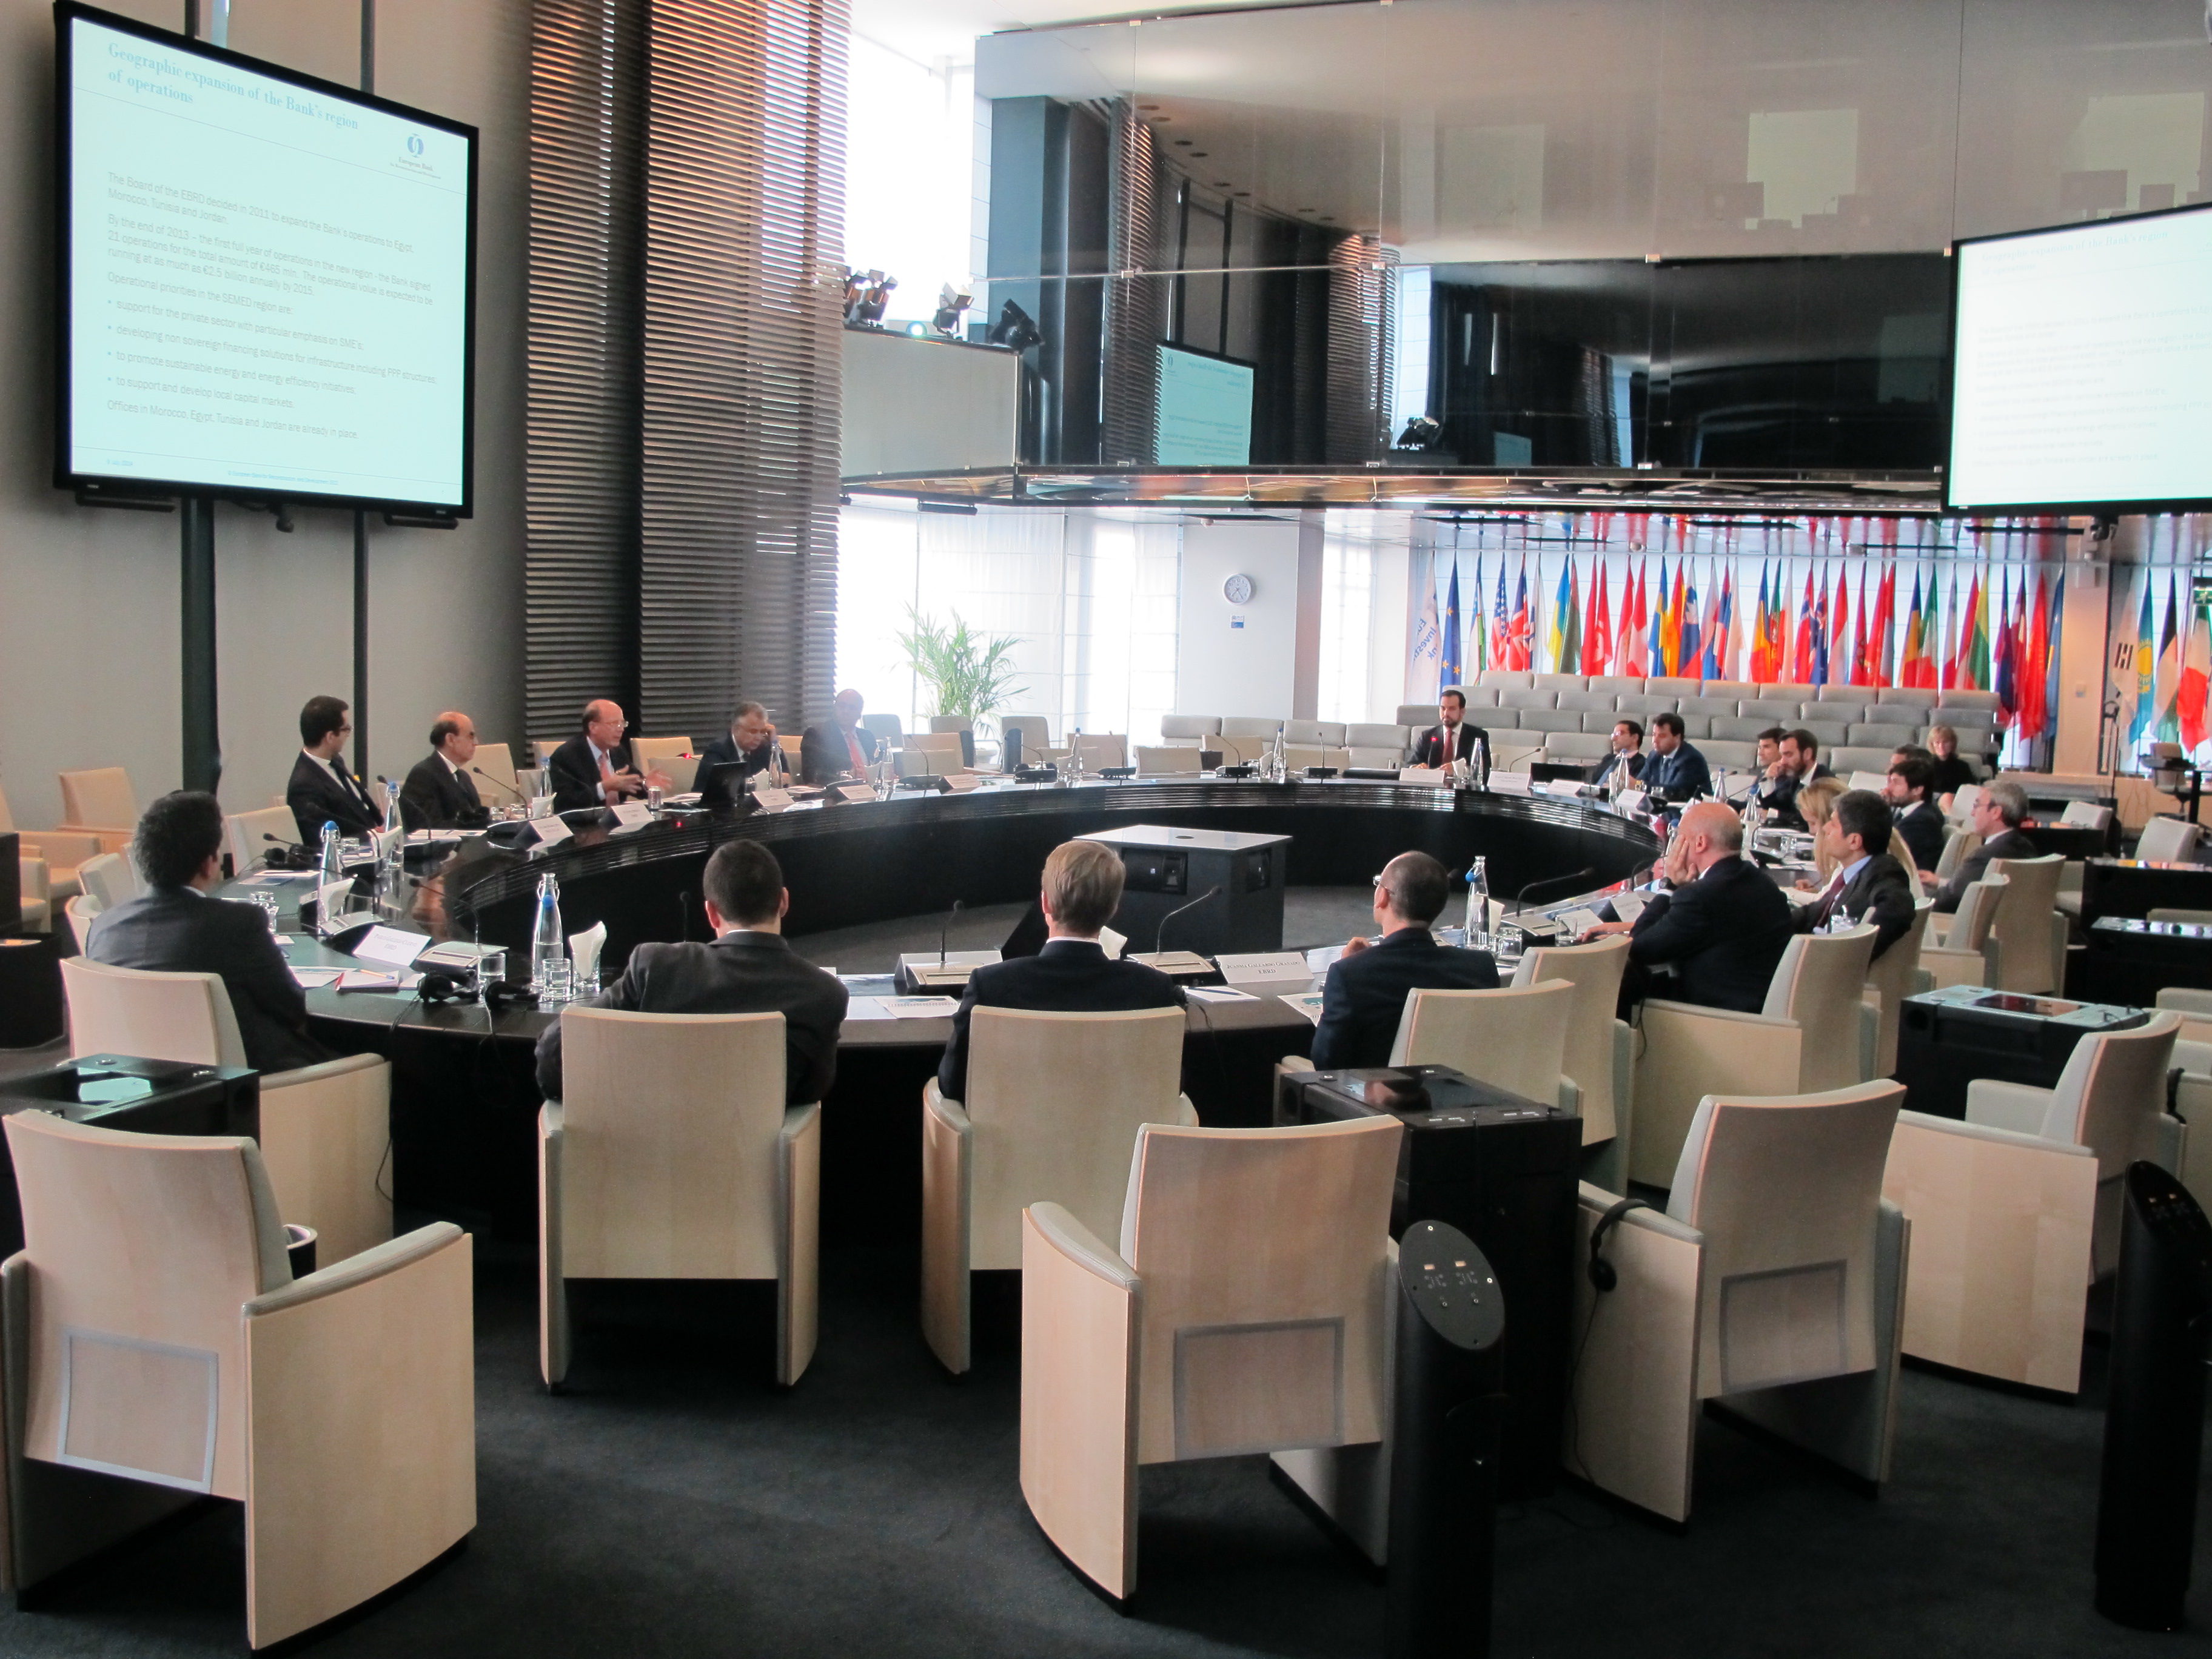 The meeting took place at the EBRD great room